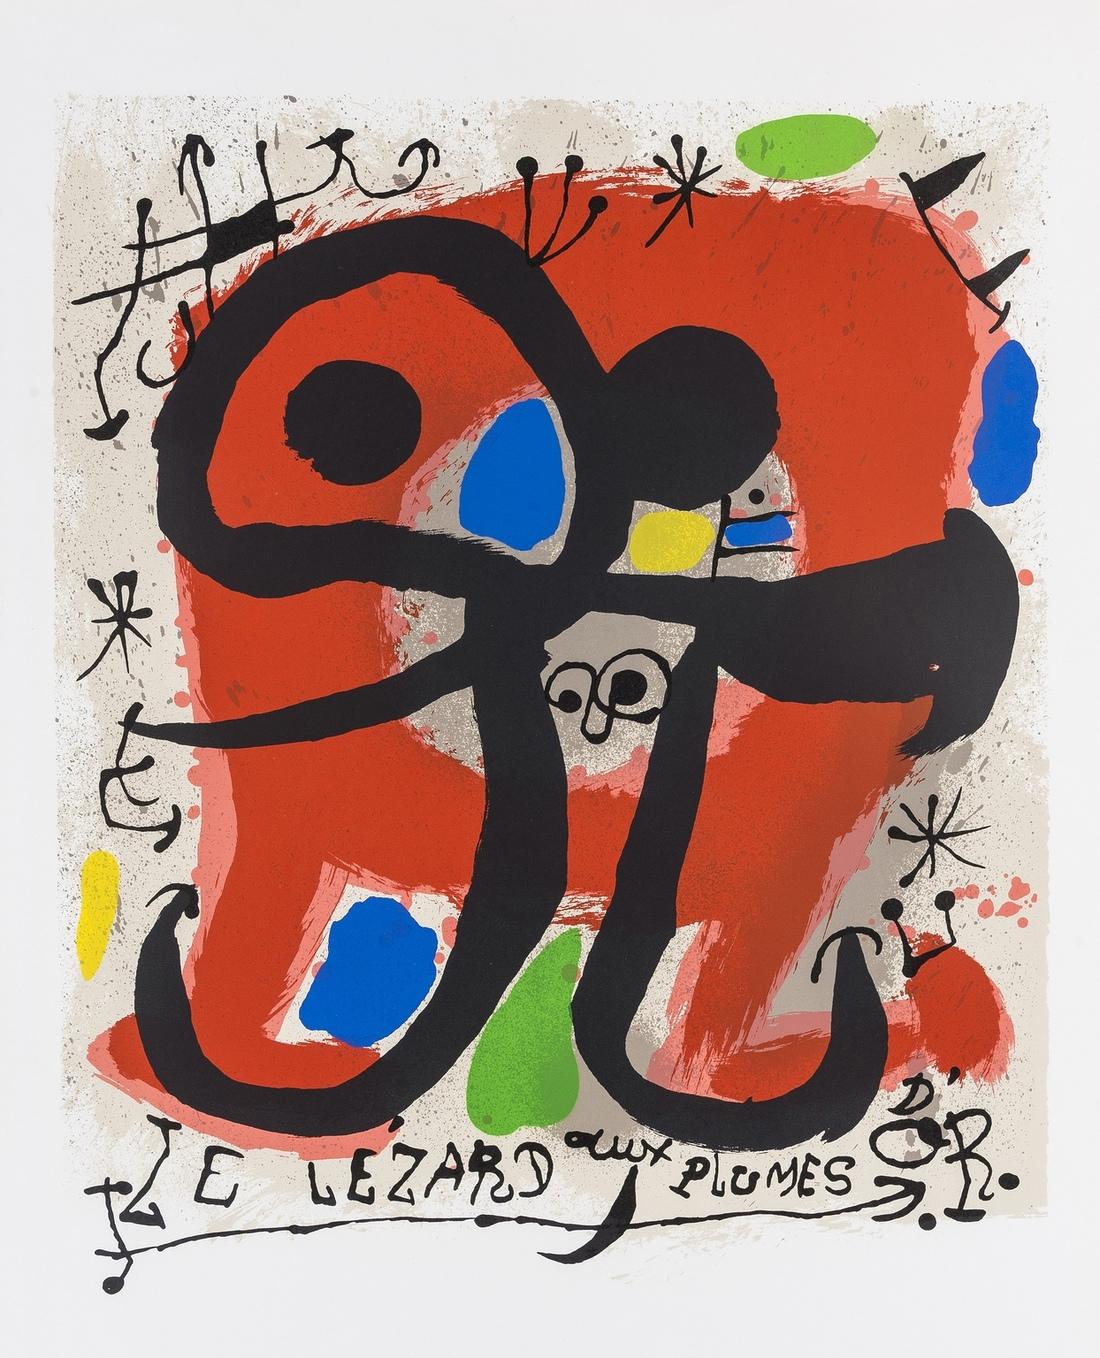 This Lithograph by Miro was originally for Galerie Berggruen exhibition Poster.  It is published by Mourlot, listed in the Catalogue Raissone as Mourlot 831.
Sheet size is 21 3/8 by 27 3/4 inches.  Published in 1971.
This piece is a proof and was in